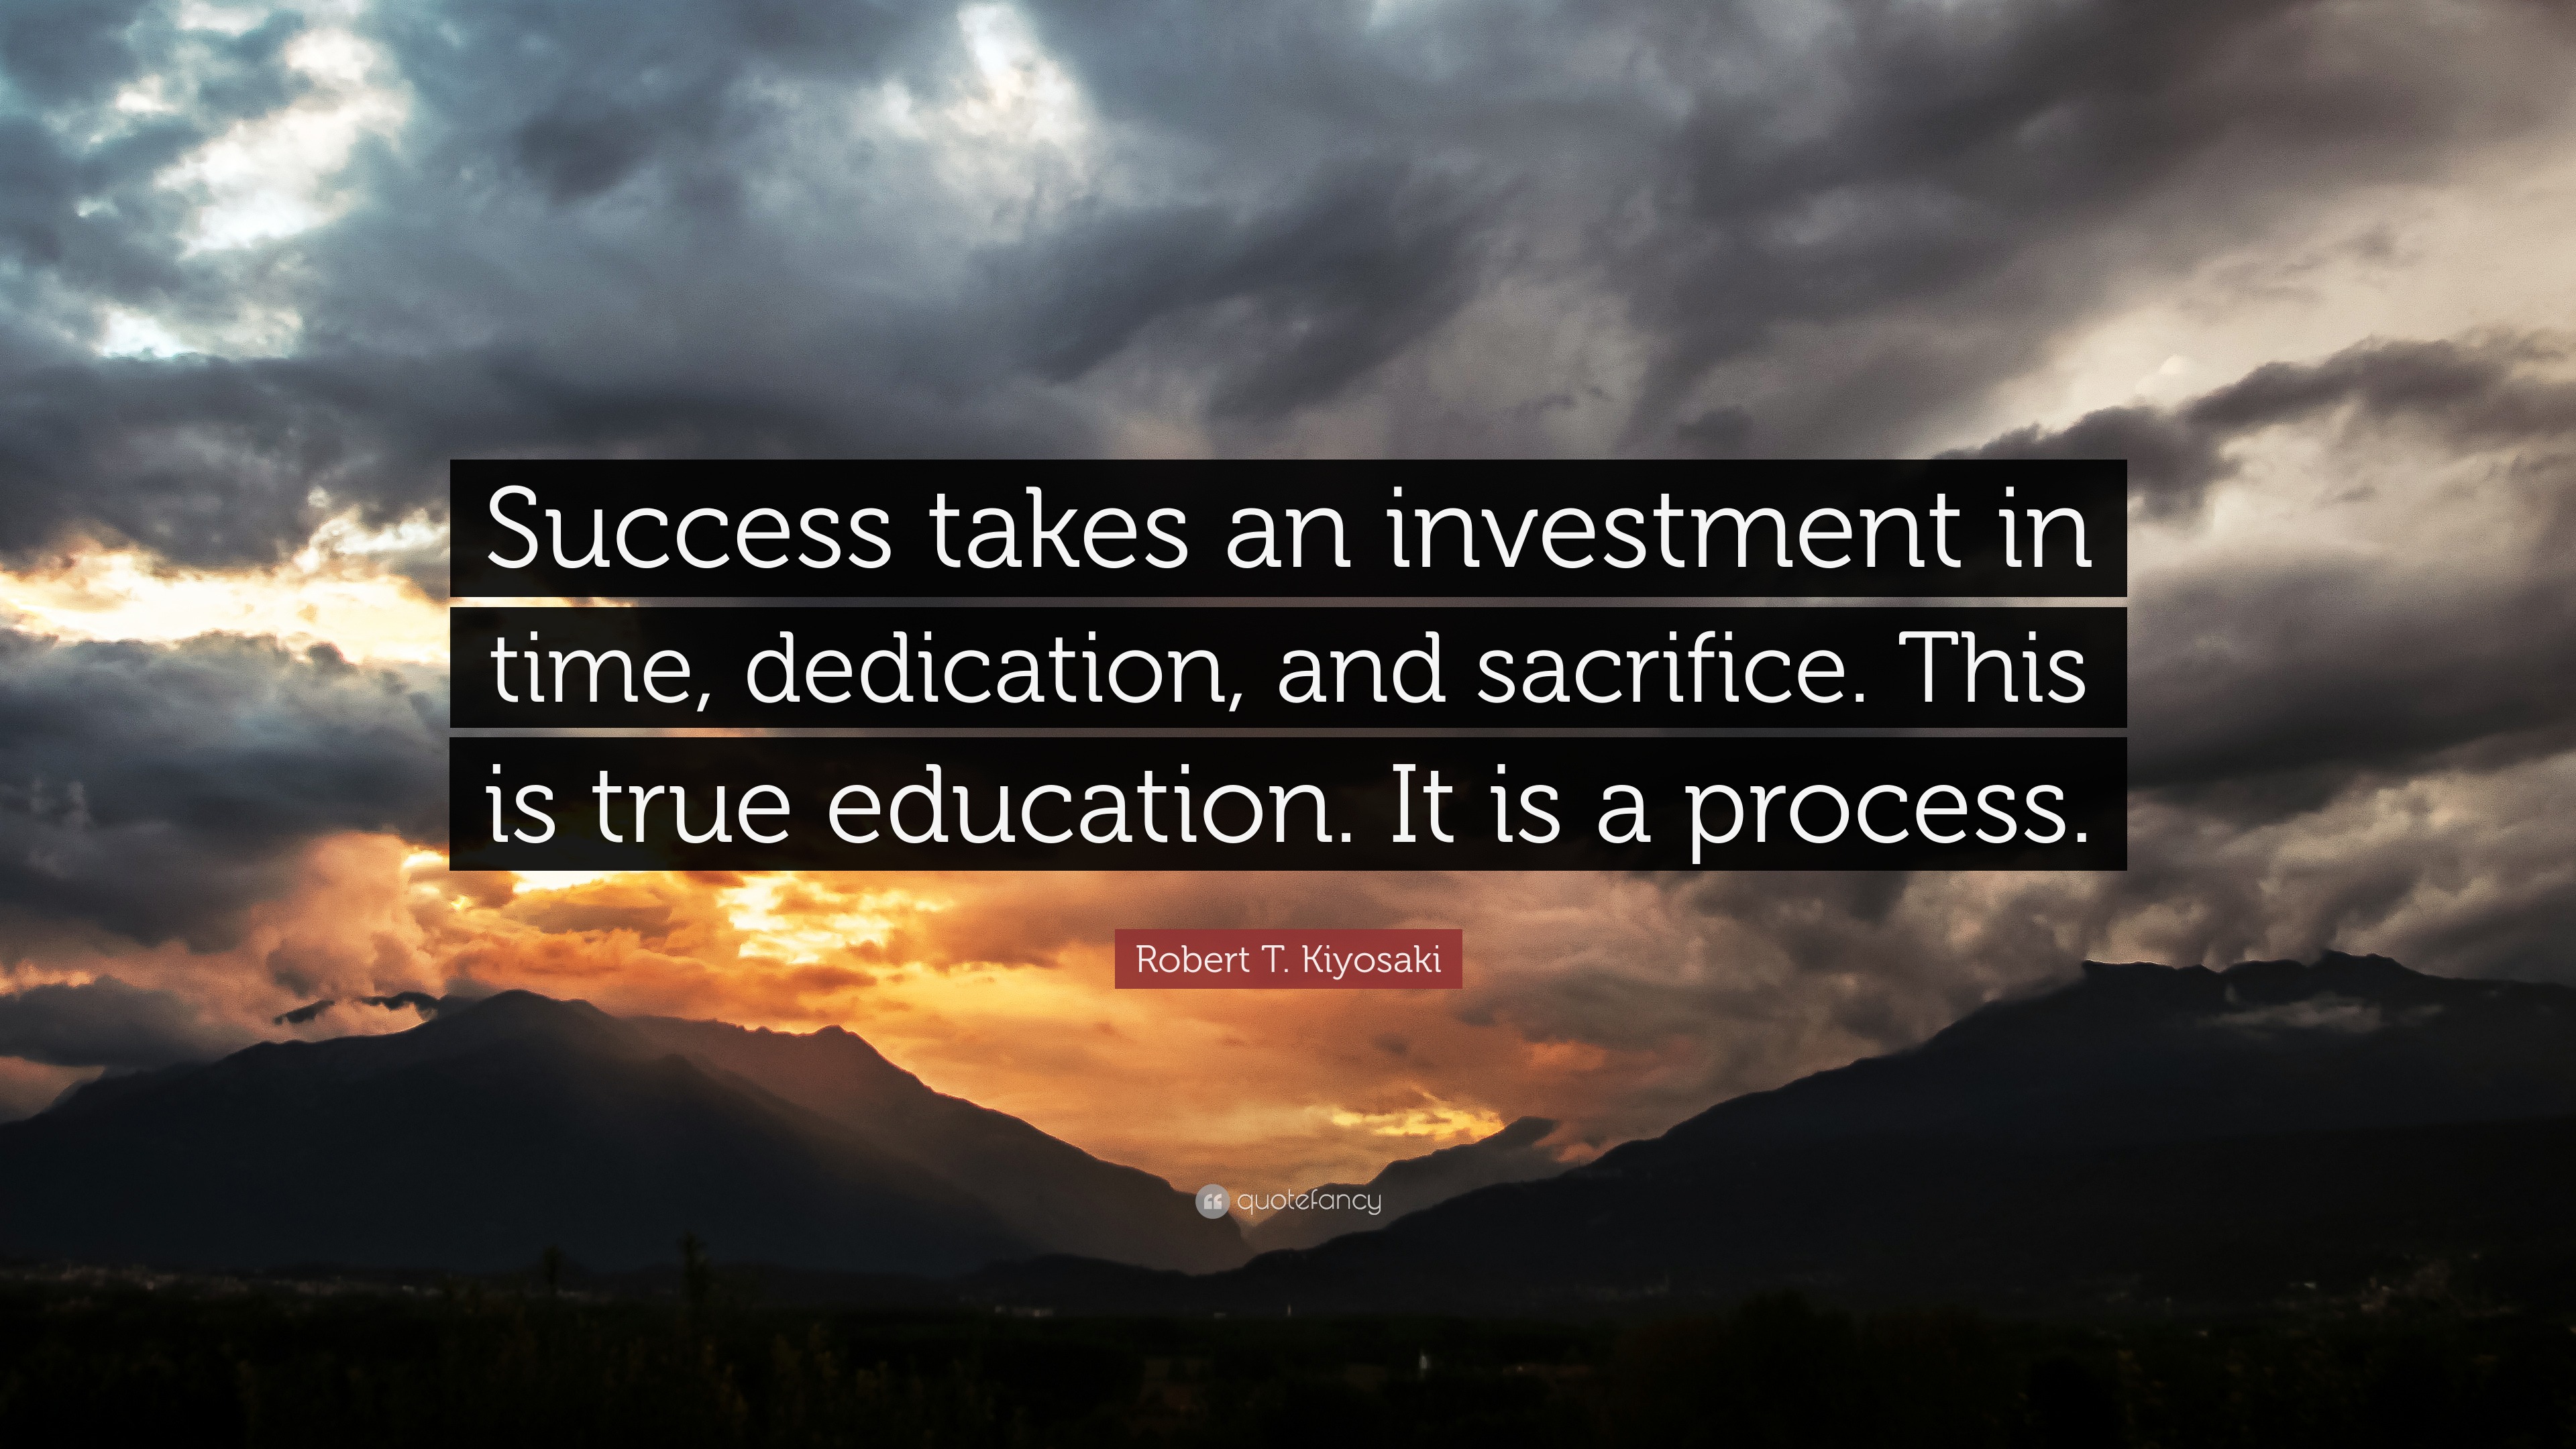 Robert T. Kiyosaki Quote: “Success takes an investment in time